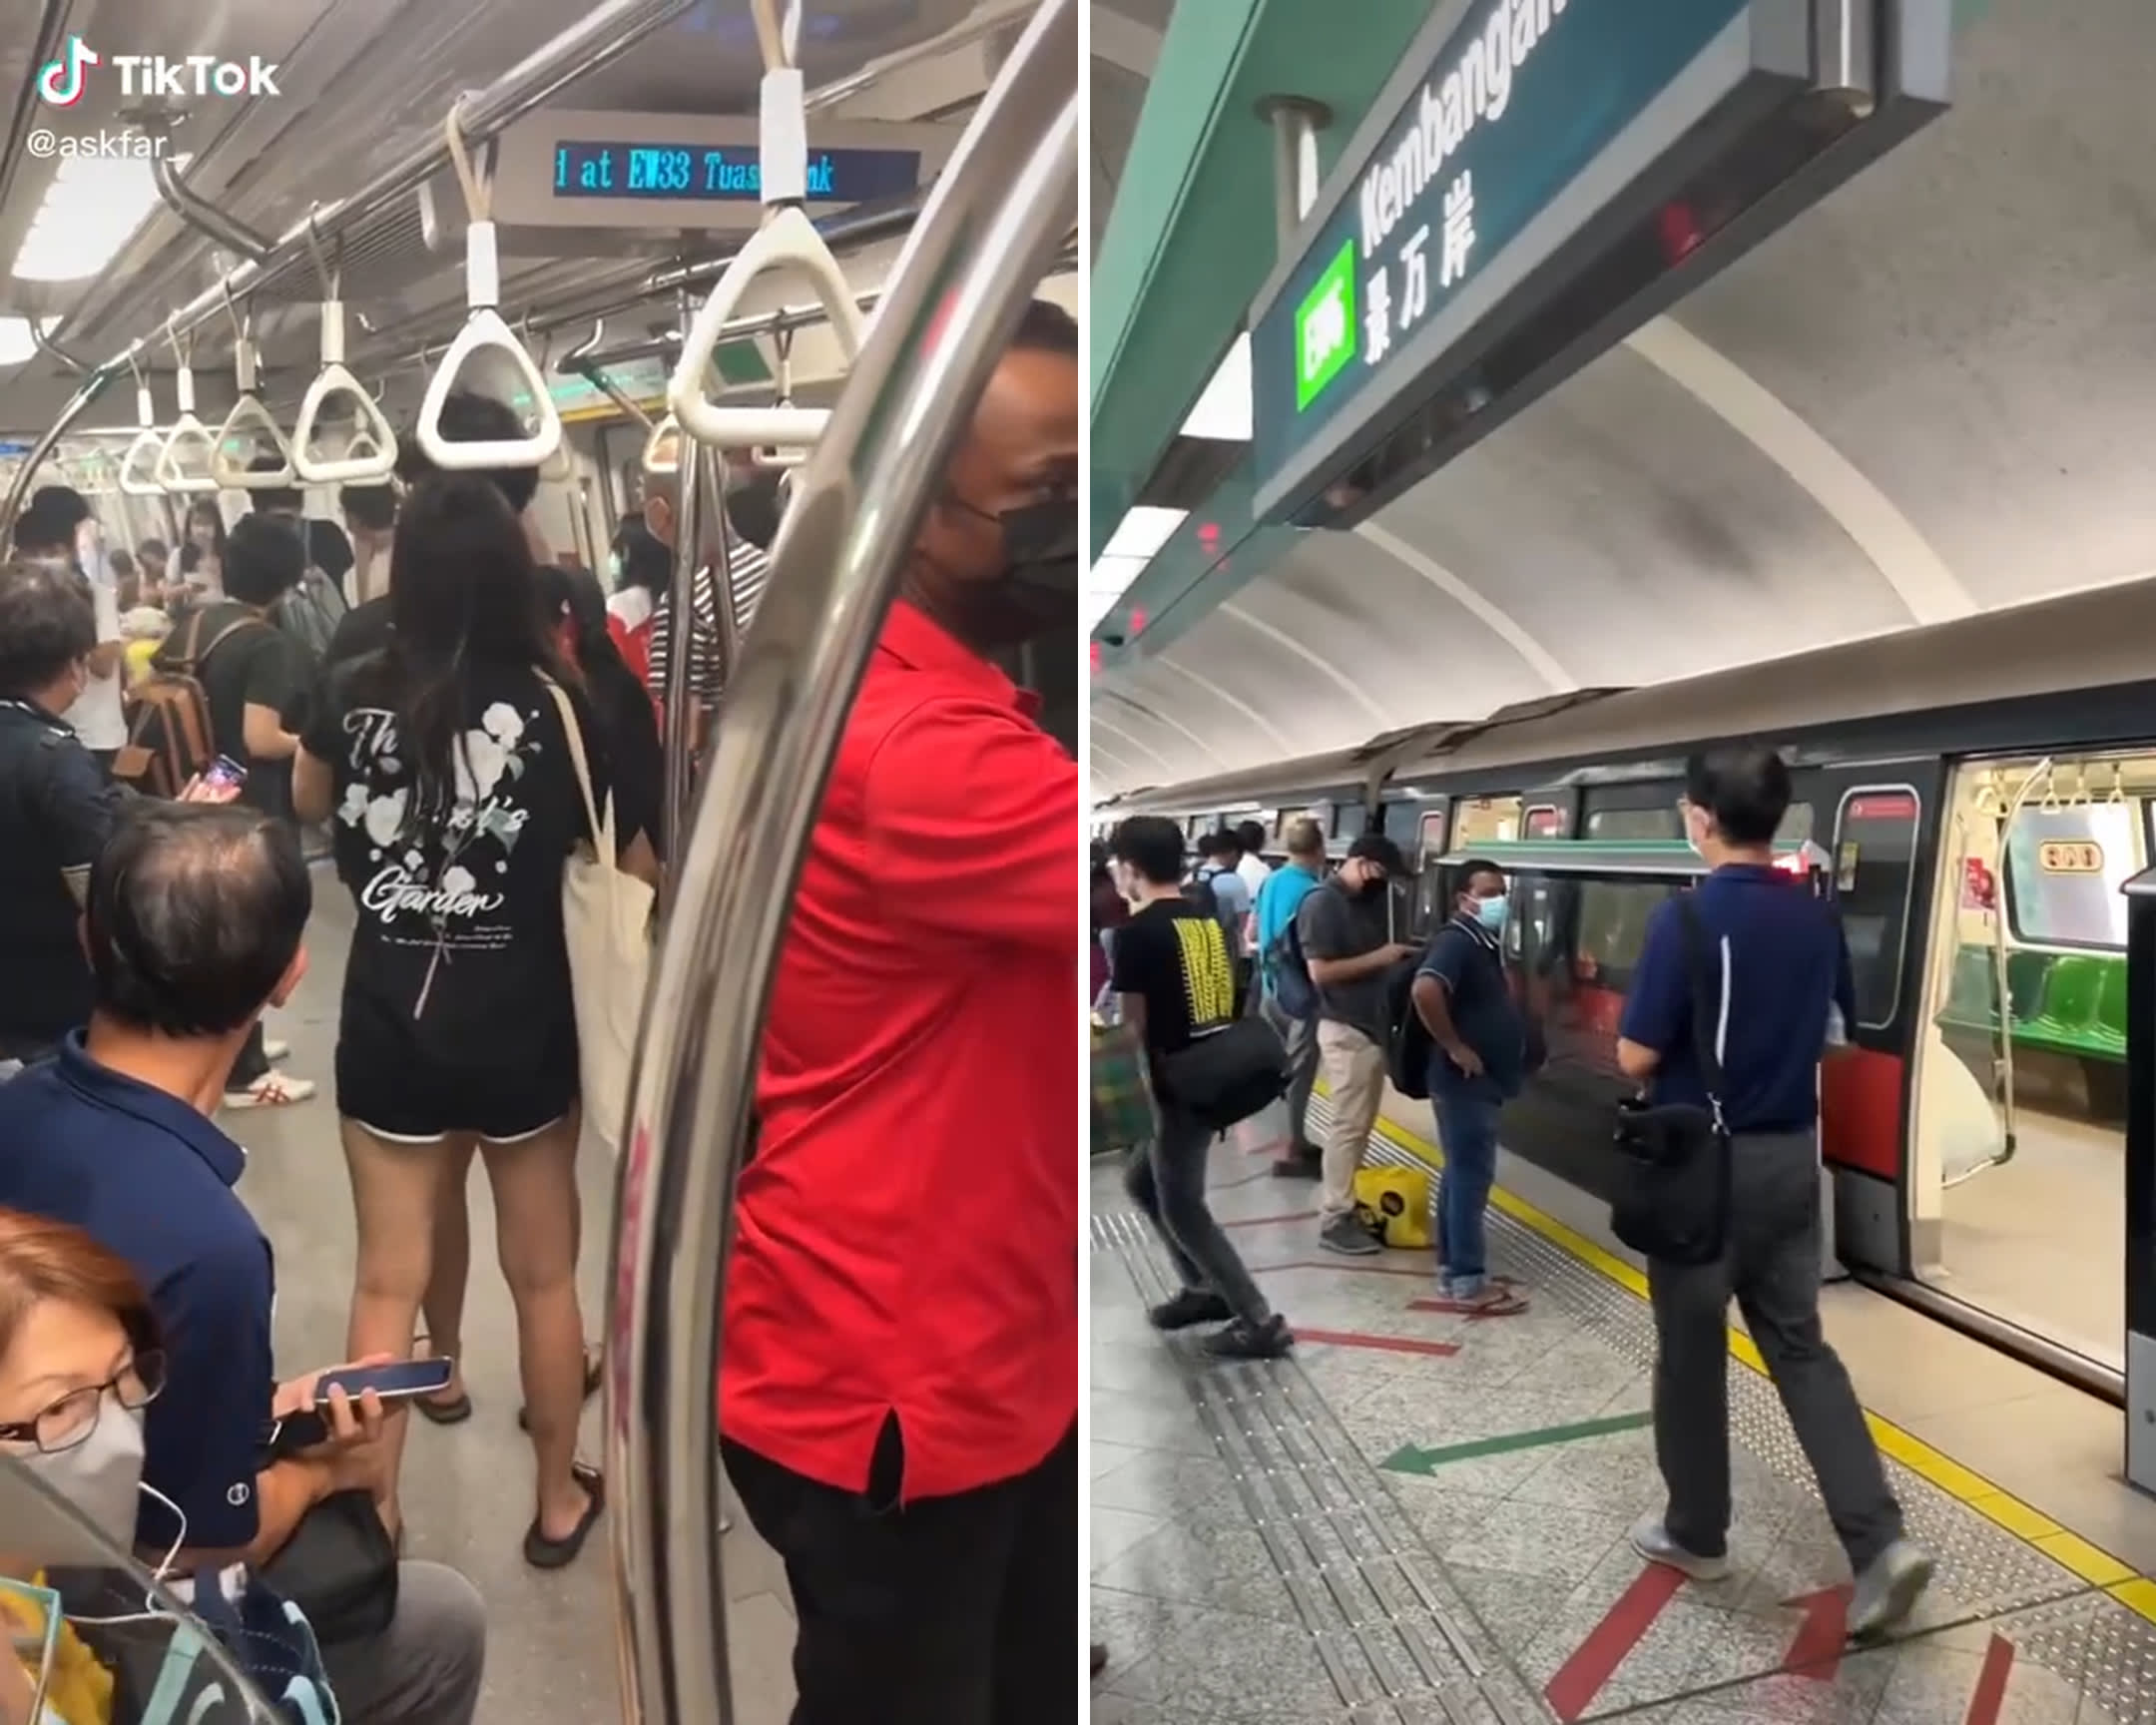 White smoke seen in train due to leaking aircon compressor, commuters disembarked as a precaution: SMRT